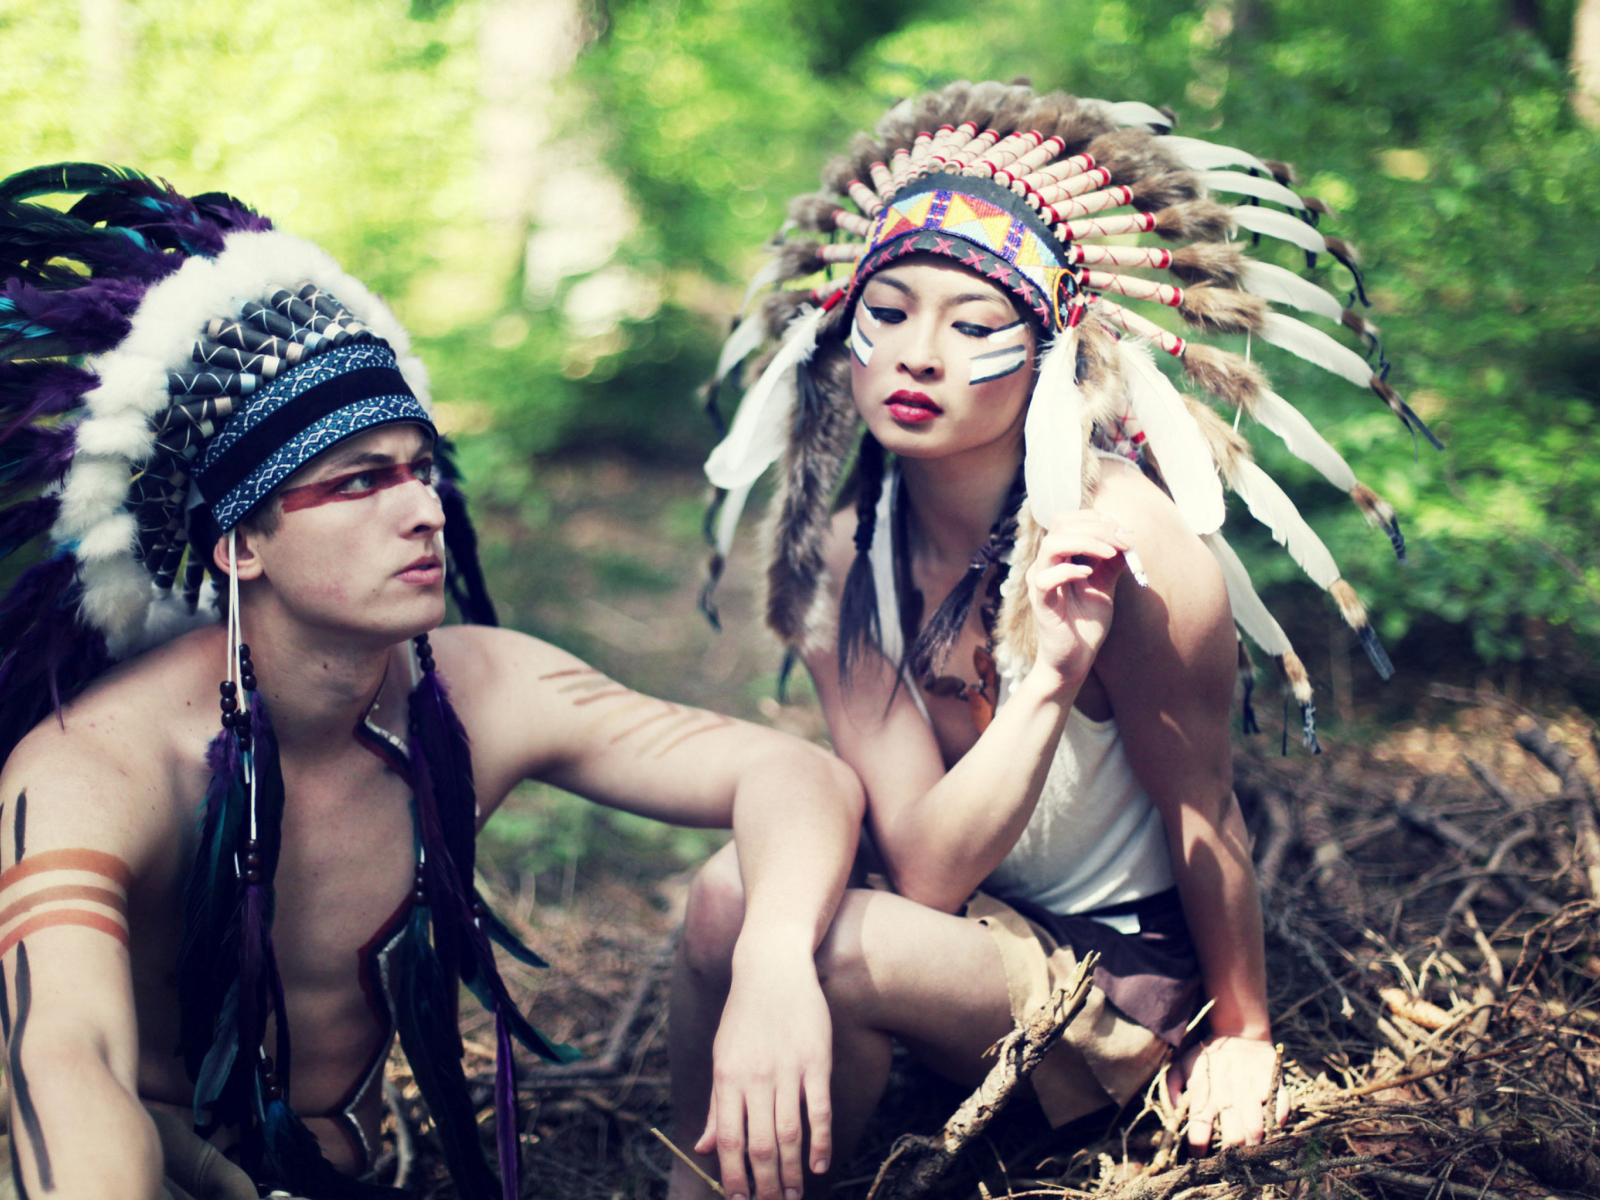 Indian Feather Hat wallpaper 1600x1200